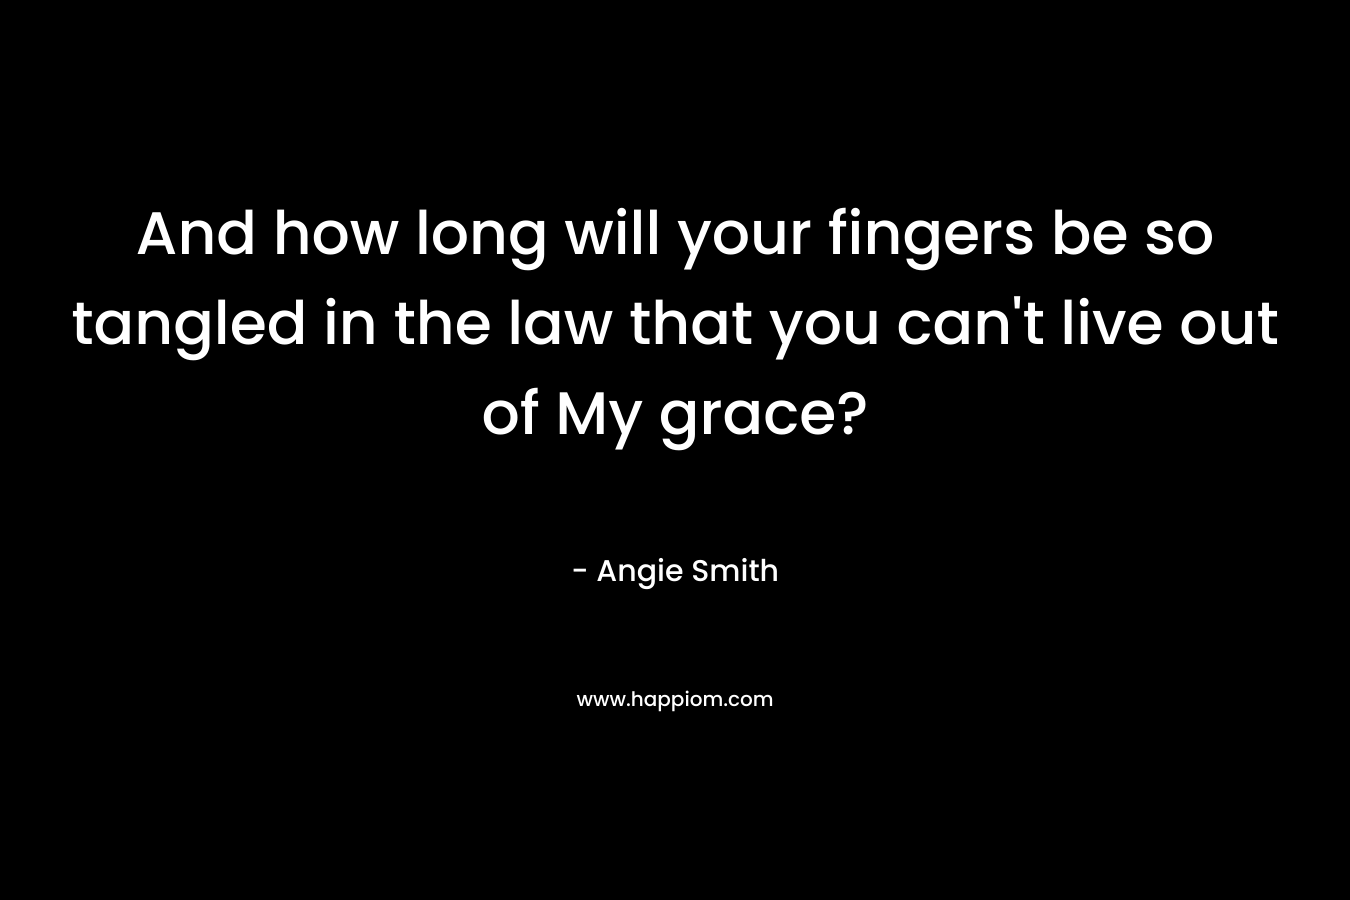 And how long will your fingers be so tangled in the law that you can’t live out of My grace? – Angie Smith